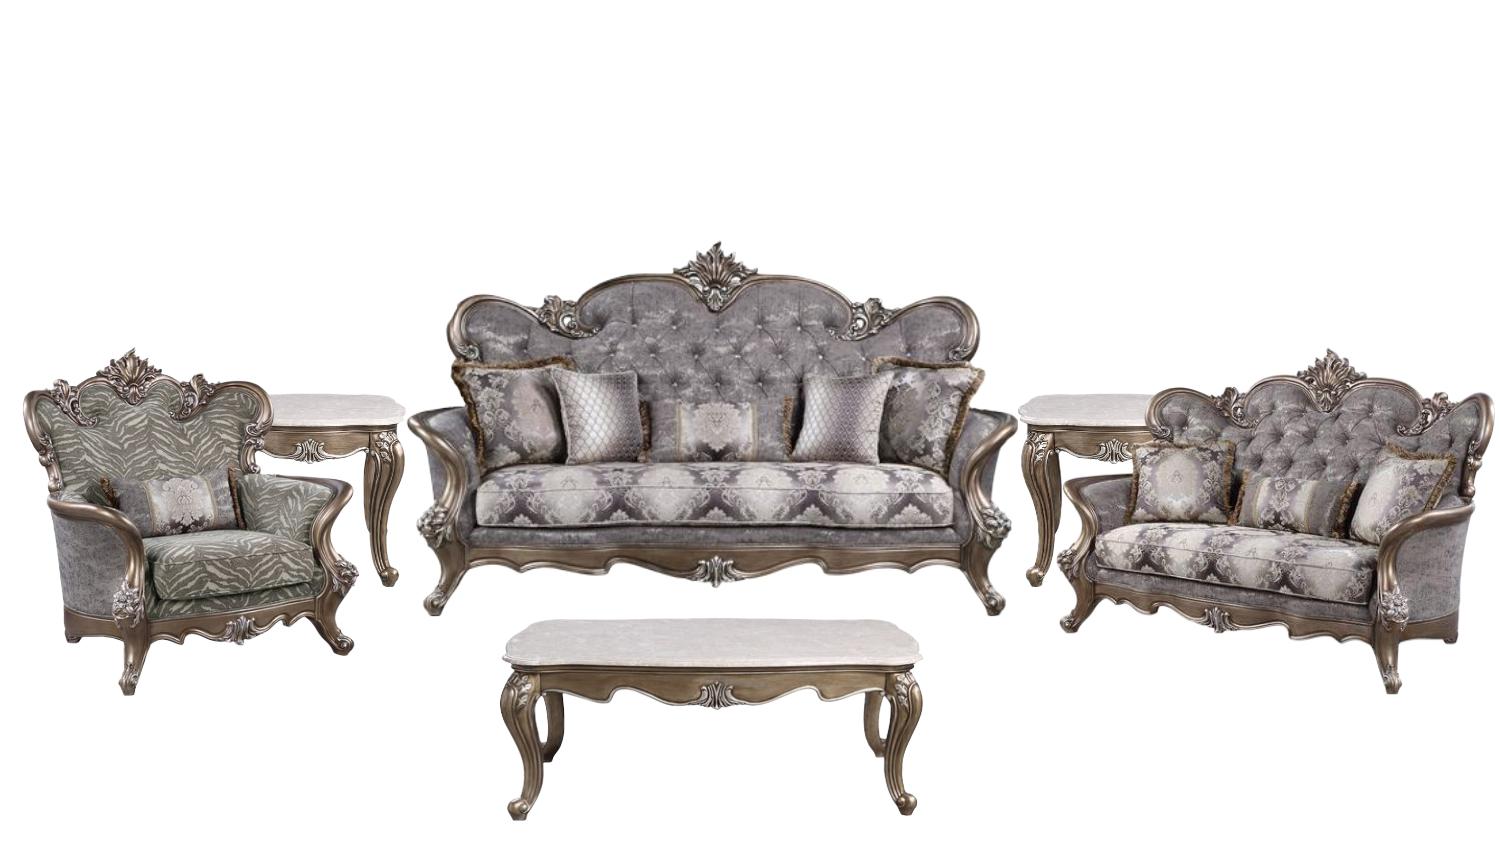 Traditional Sofa Loveseat Chair Coffee Table Two End Tables Elozzol LV00299-6pcs in Gray Fabric